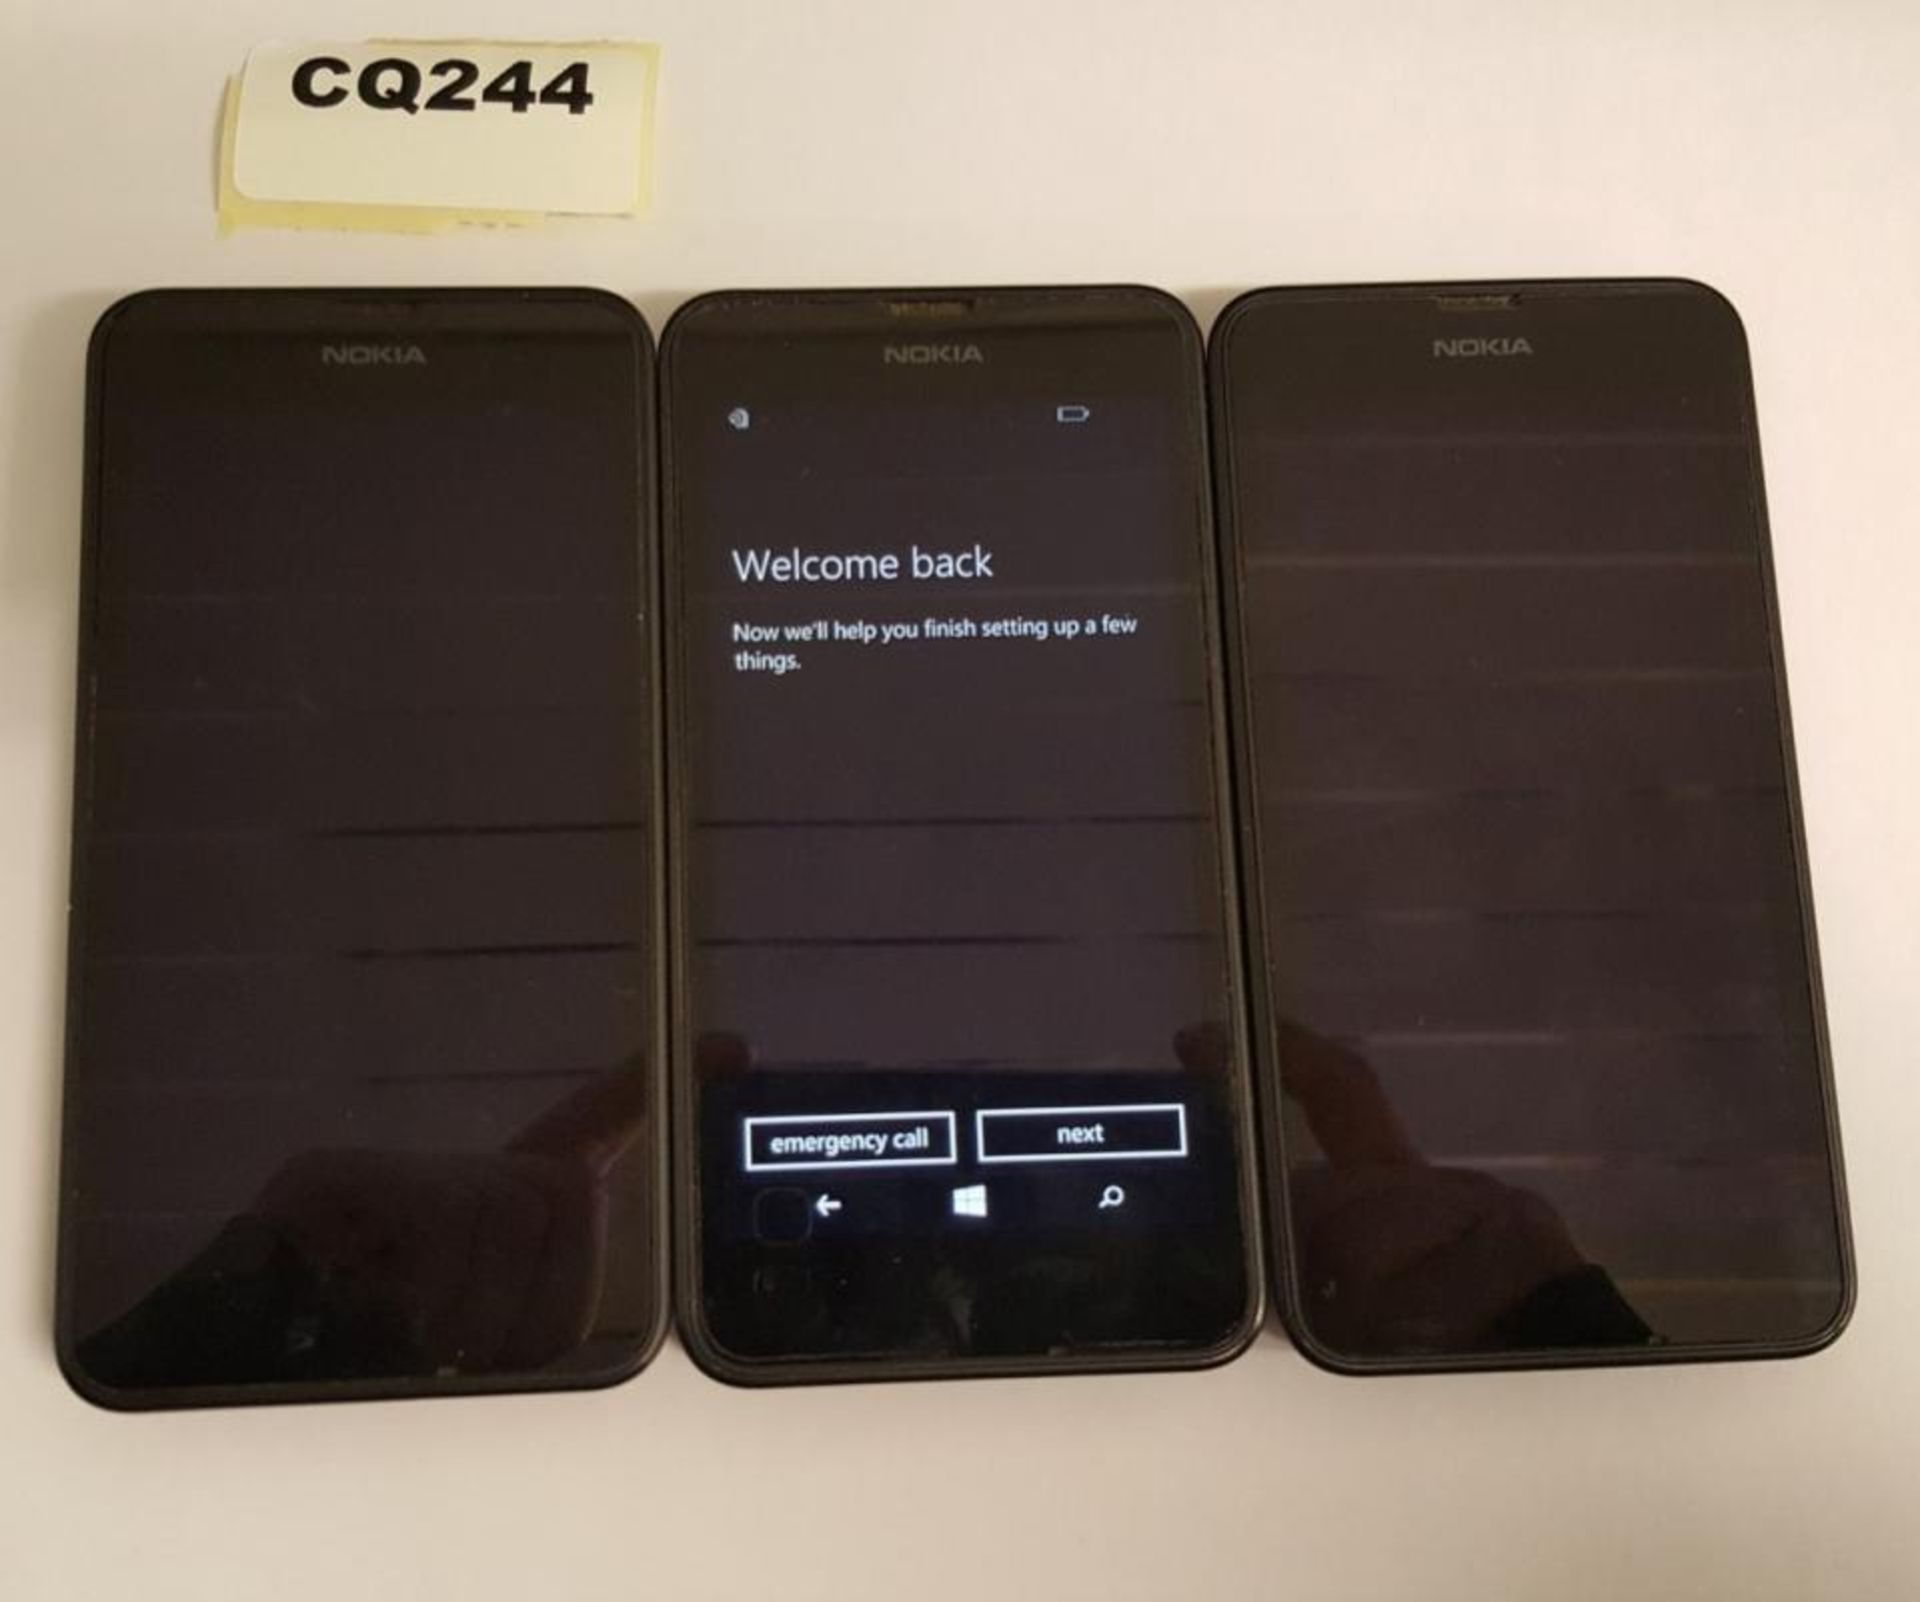 3 x Nokia Lumia 630 Black Smartphones ( Have Been Turn On And Factory Reset) - Ref CQ244 - CL011 - L - Image 2 of 3